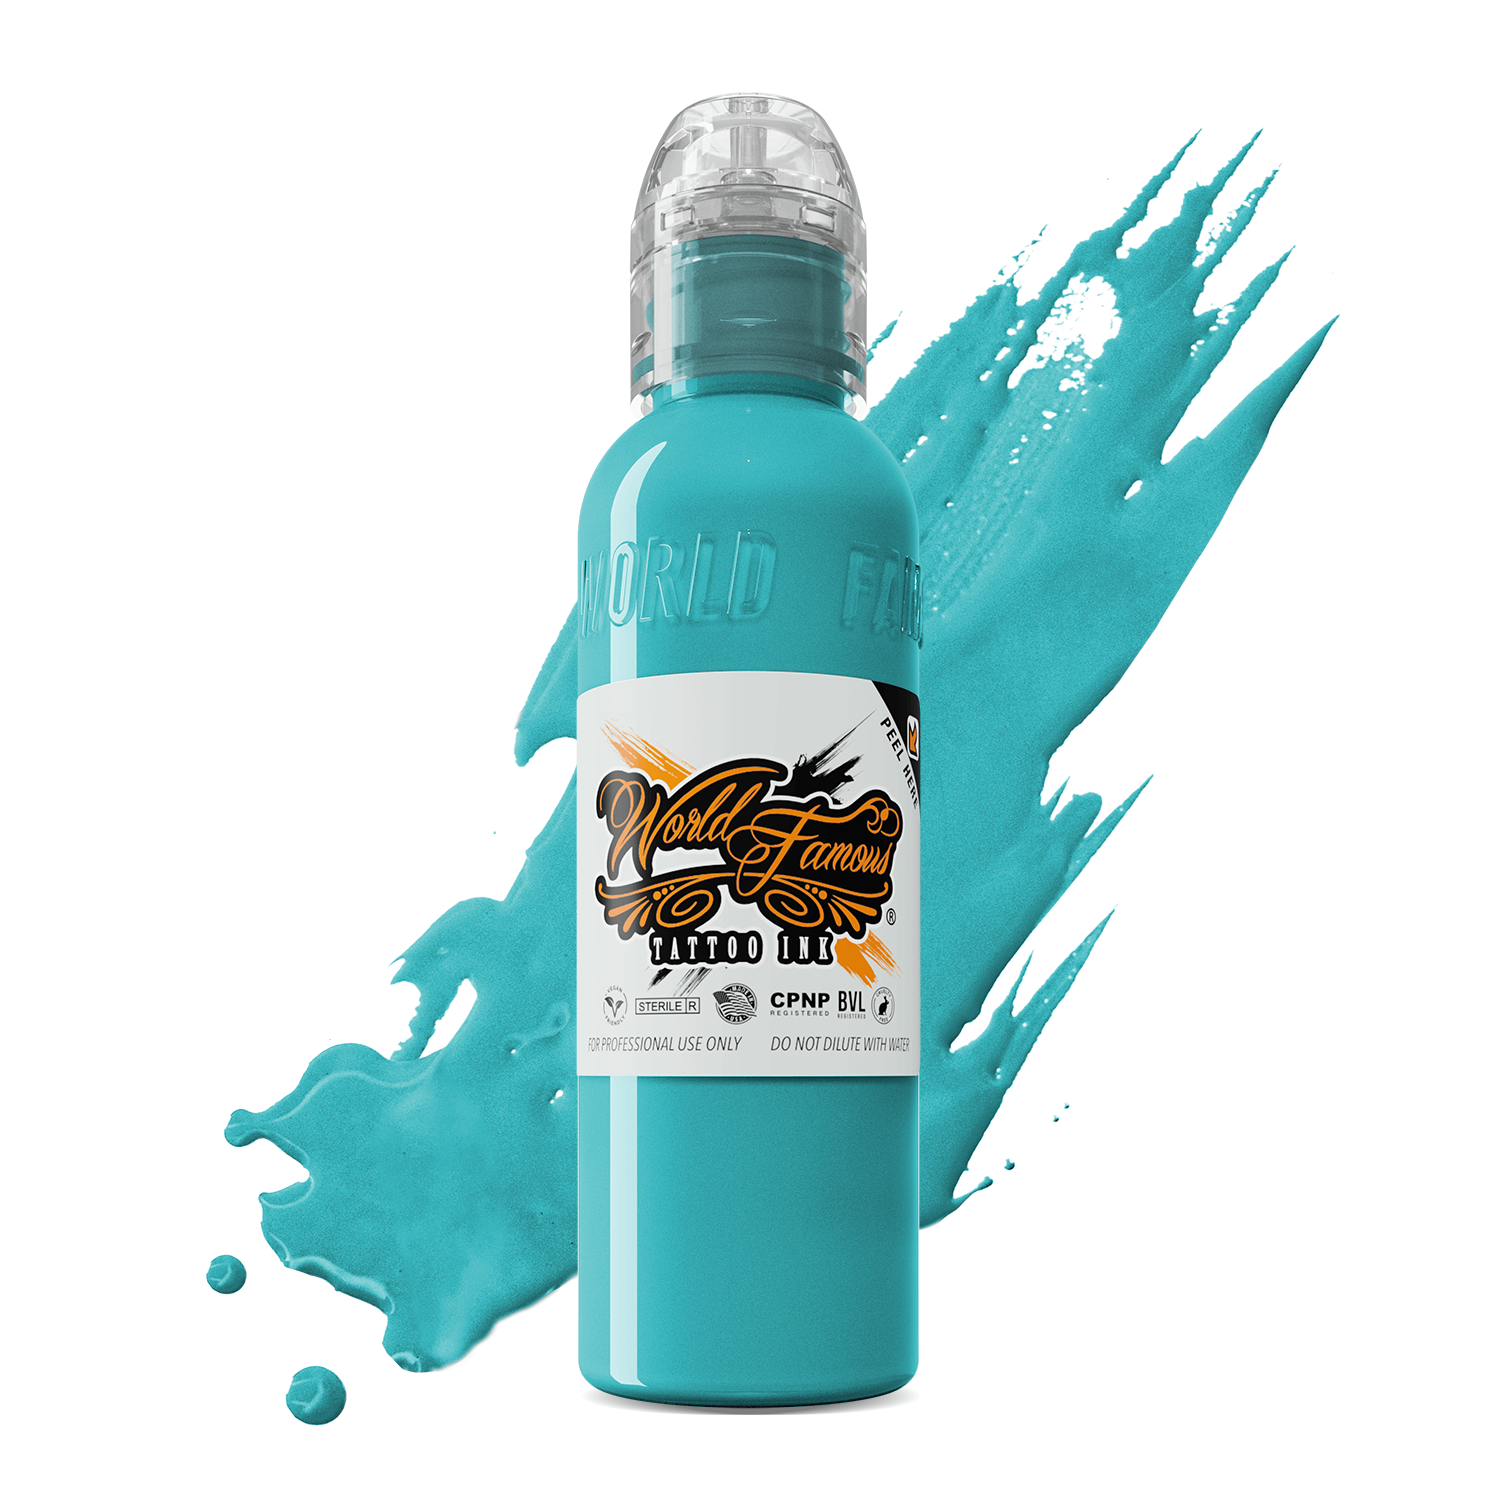 WFBRB2 World Famous Barrier Reef Blue 2ozBarrier Reef Blue | World Famous Tattoo Ink